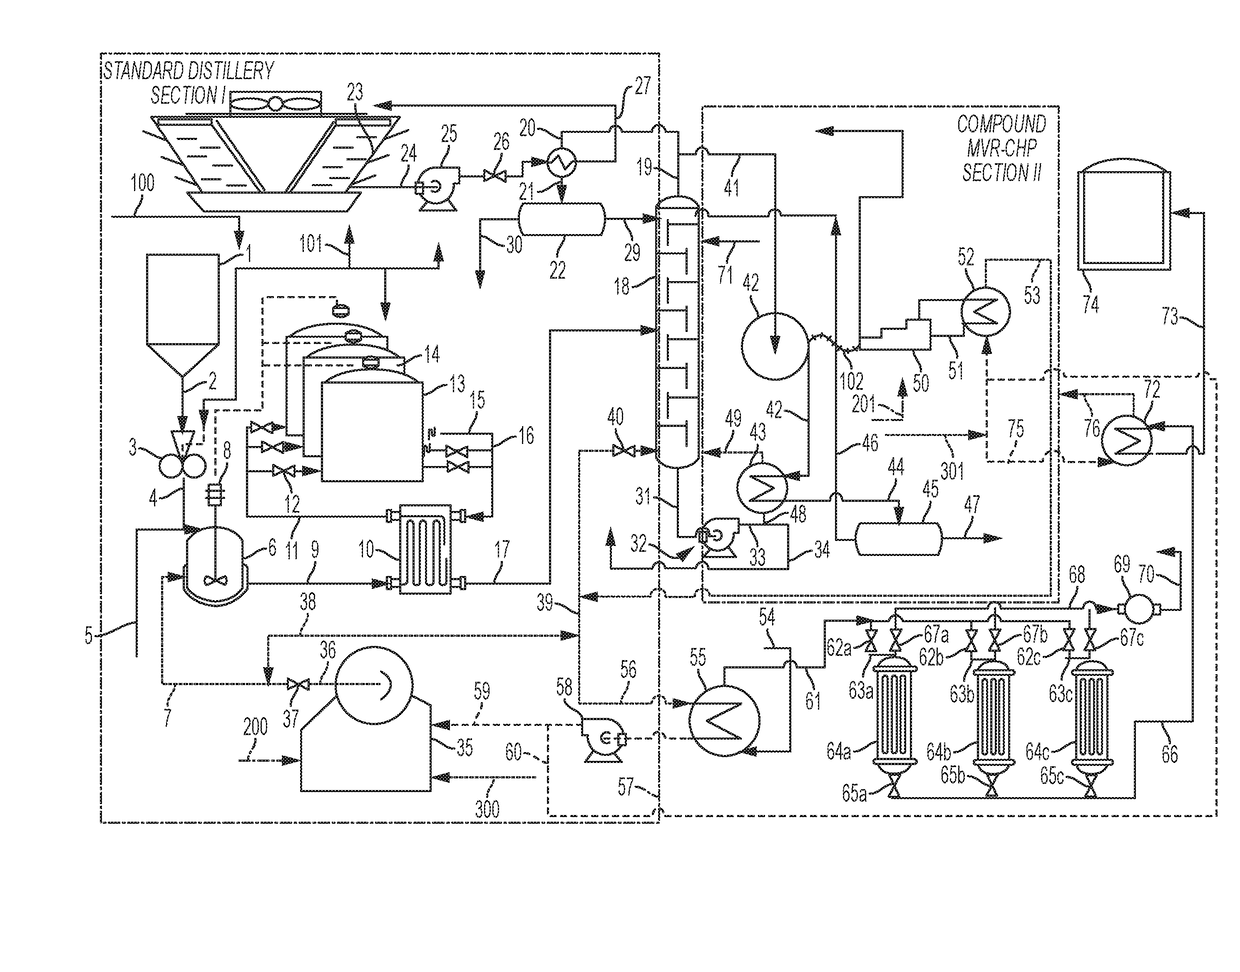 Energy-efficient systems including combined heat and power and mechanical vapor compression for biofuel or biochemical plants